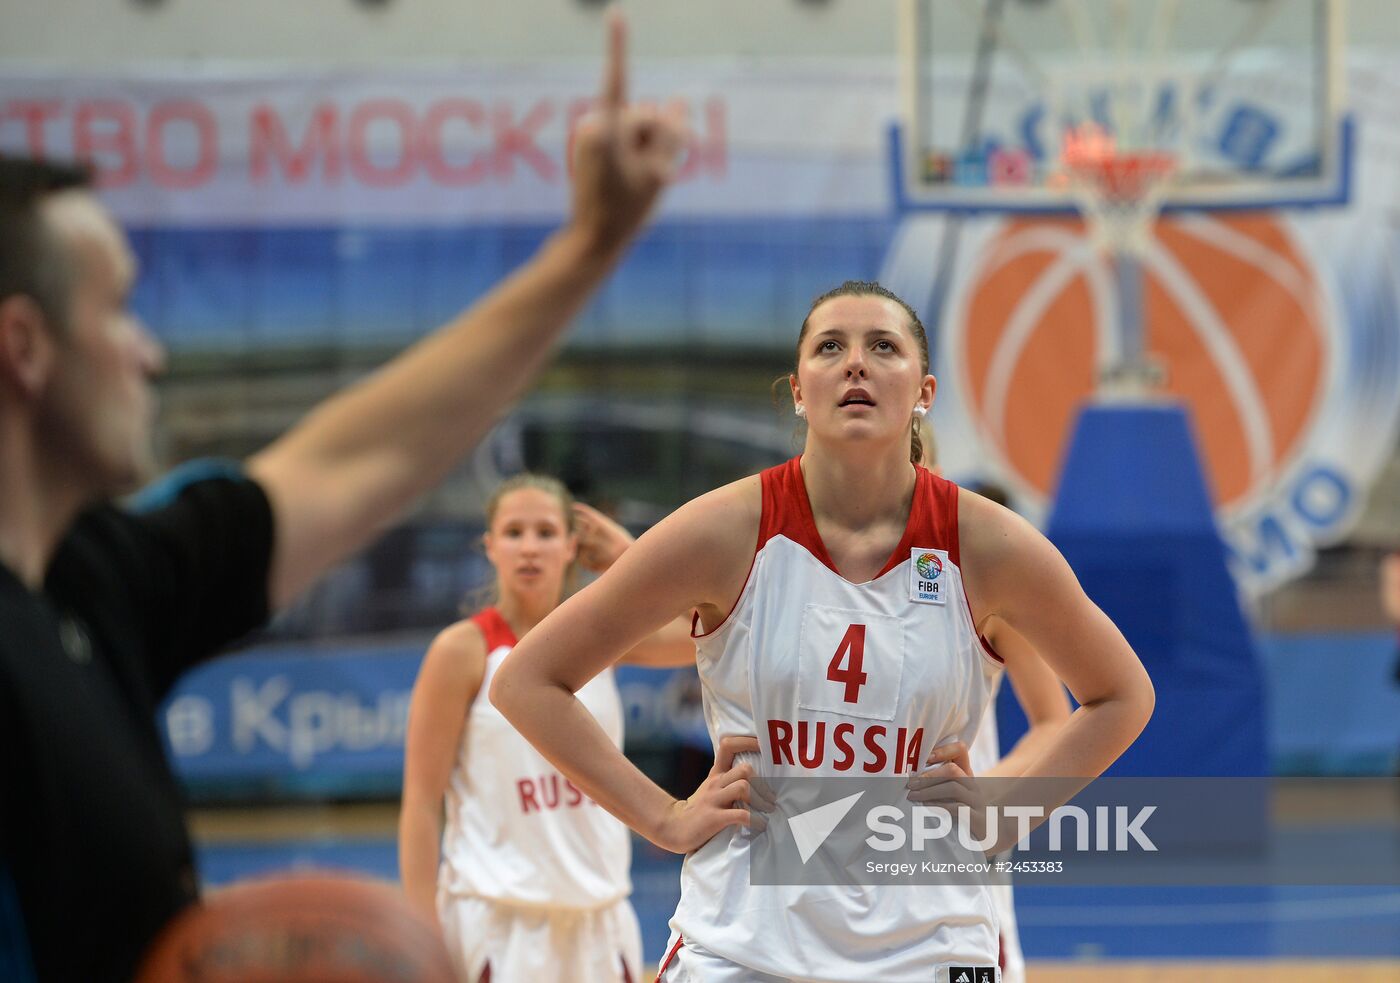 Basketball. Qualifier for the FIBA EuroBasket 2015 event. Russia vs. the Netherlands